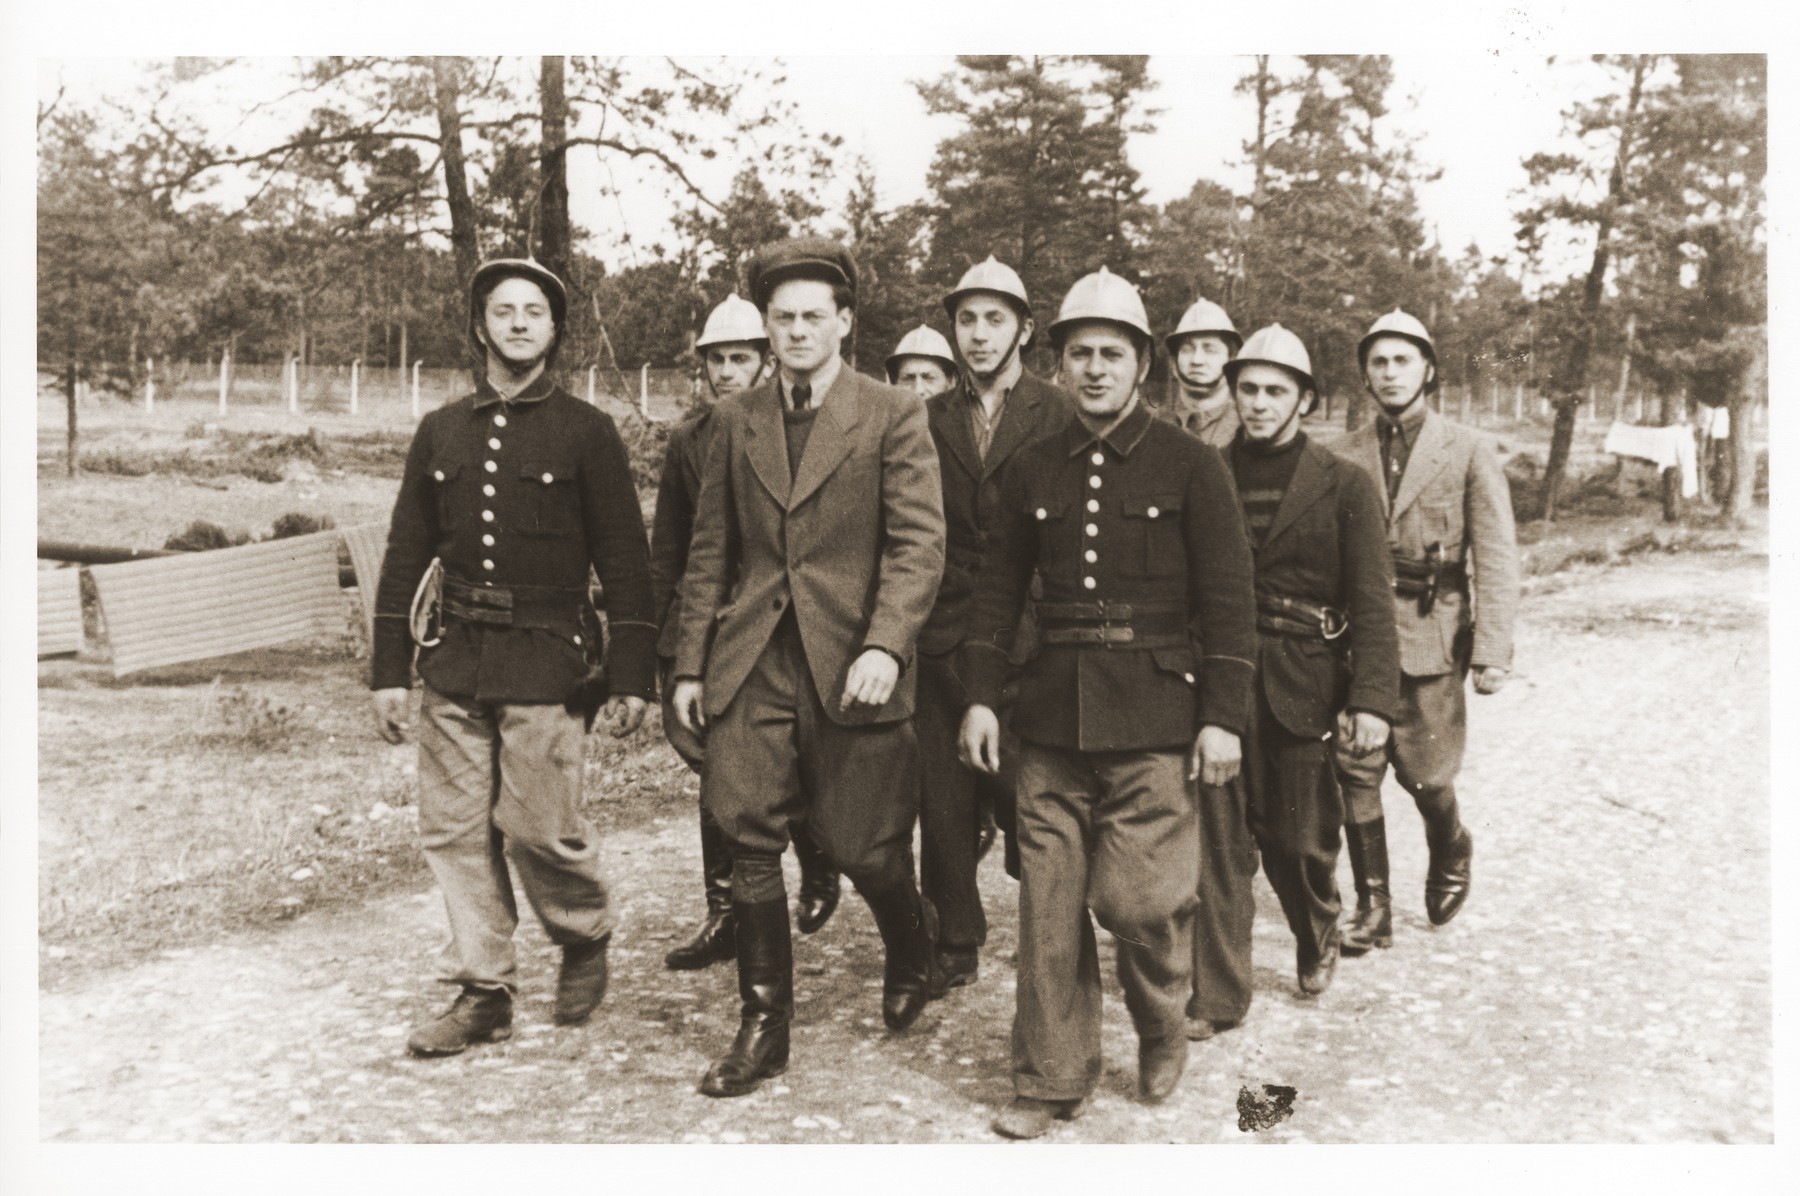 Members of the Foehrenwald displaced persons camp fire department march along a road in the camp.

Oskar Littman, the fire chief, is pictured in the center wearing a soft cap.  Sol Zeifman is pictured in the back, far left.